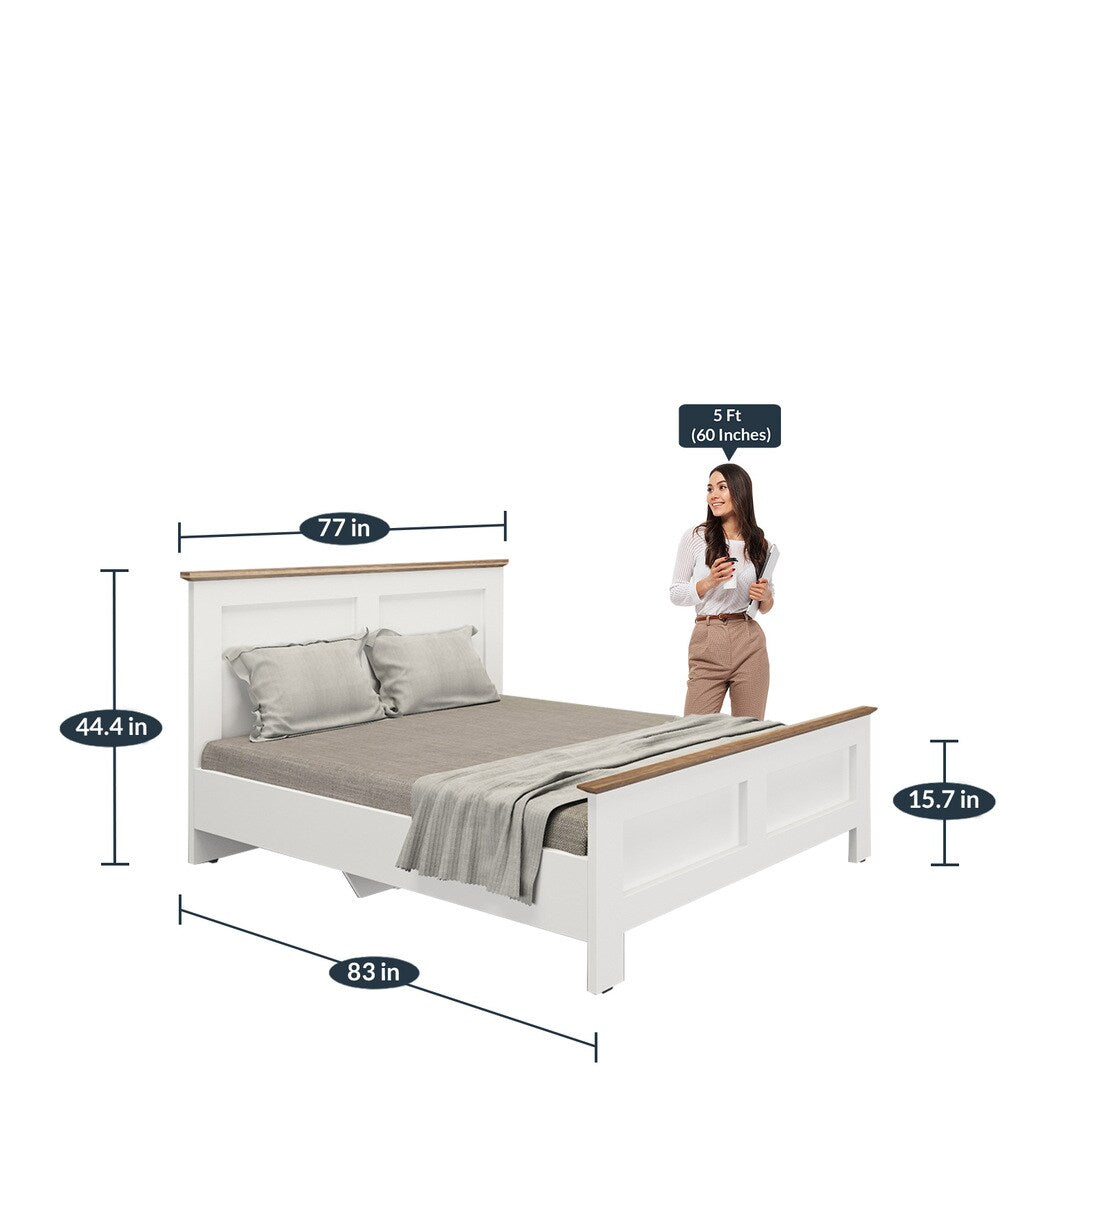 Colen King Size Bed in Mist White Finish